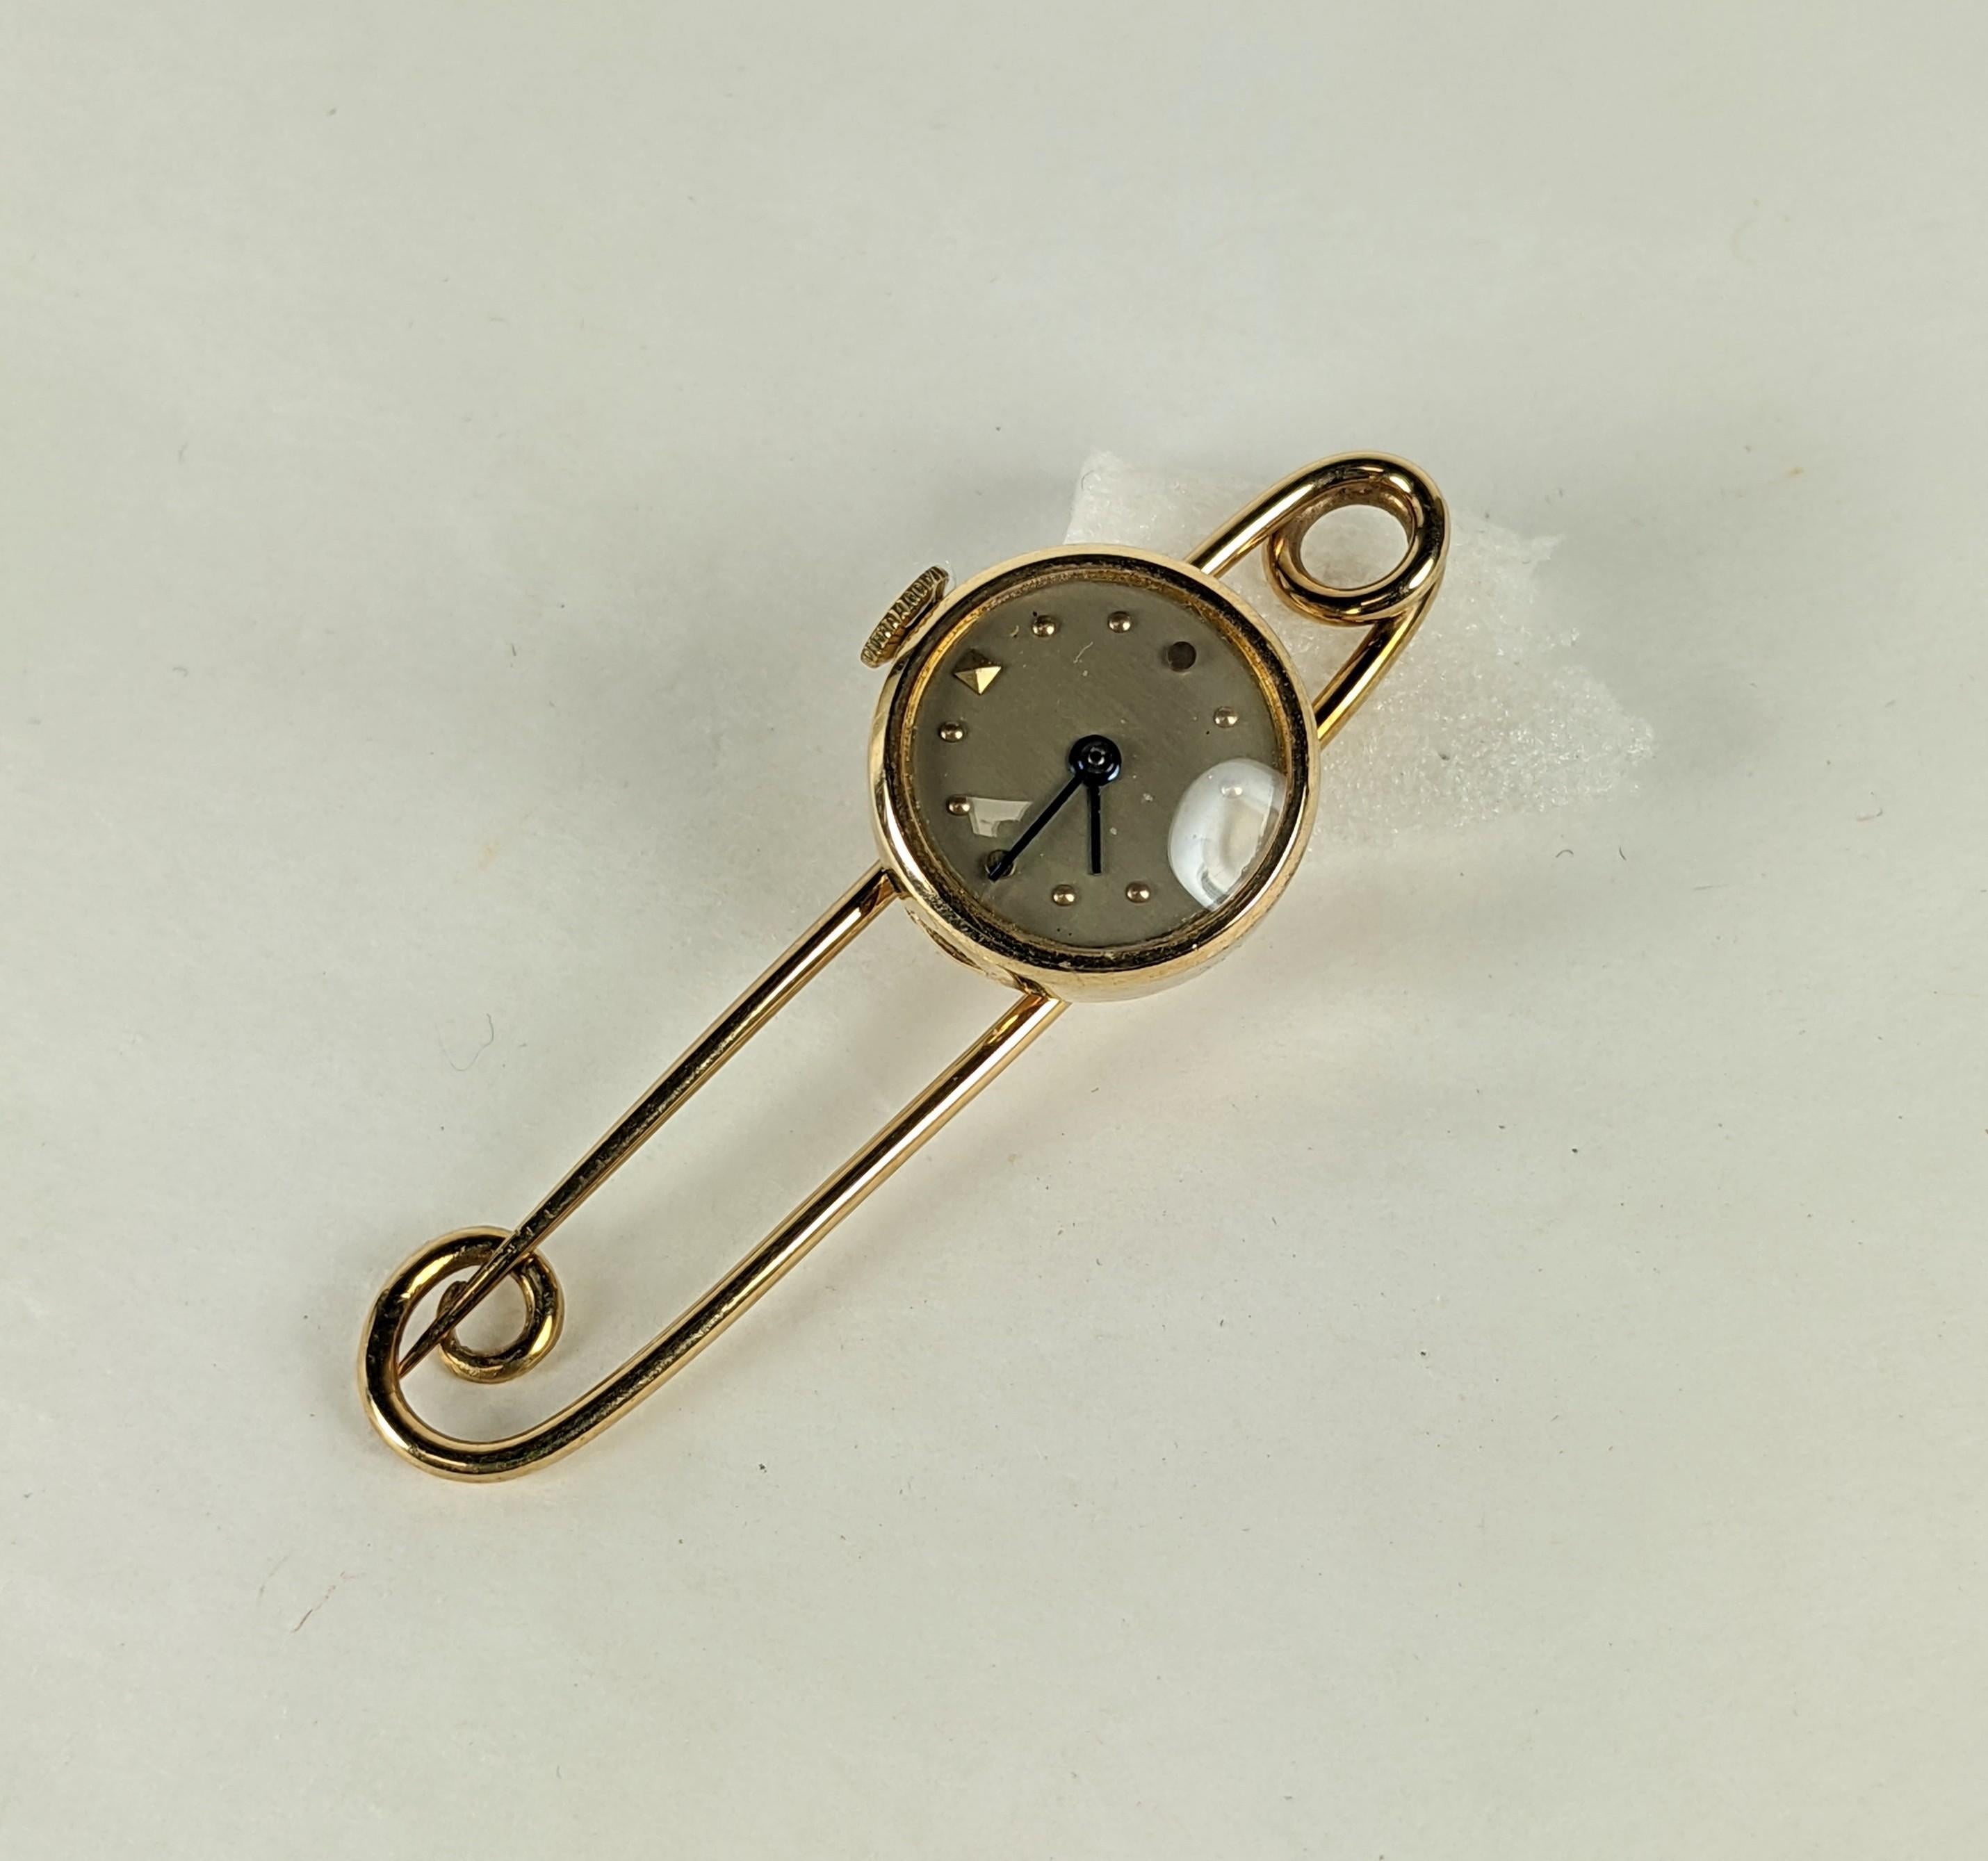 Charming Gold Watch Safety Pin set in 14k gold from the 1940's. Great design with watch that swivels from the safety pin for easy viewing. The safety pin is made with one gold wire that forms an elegant self closure. Super versatile and great for a